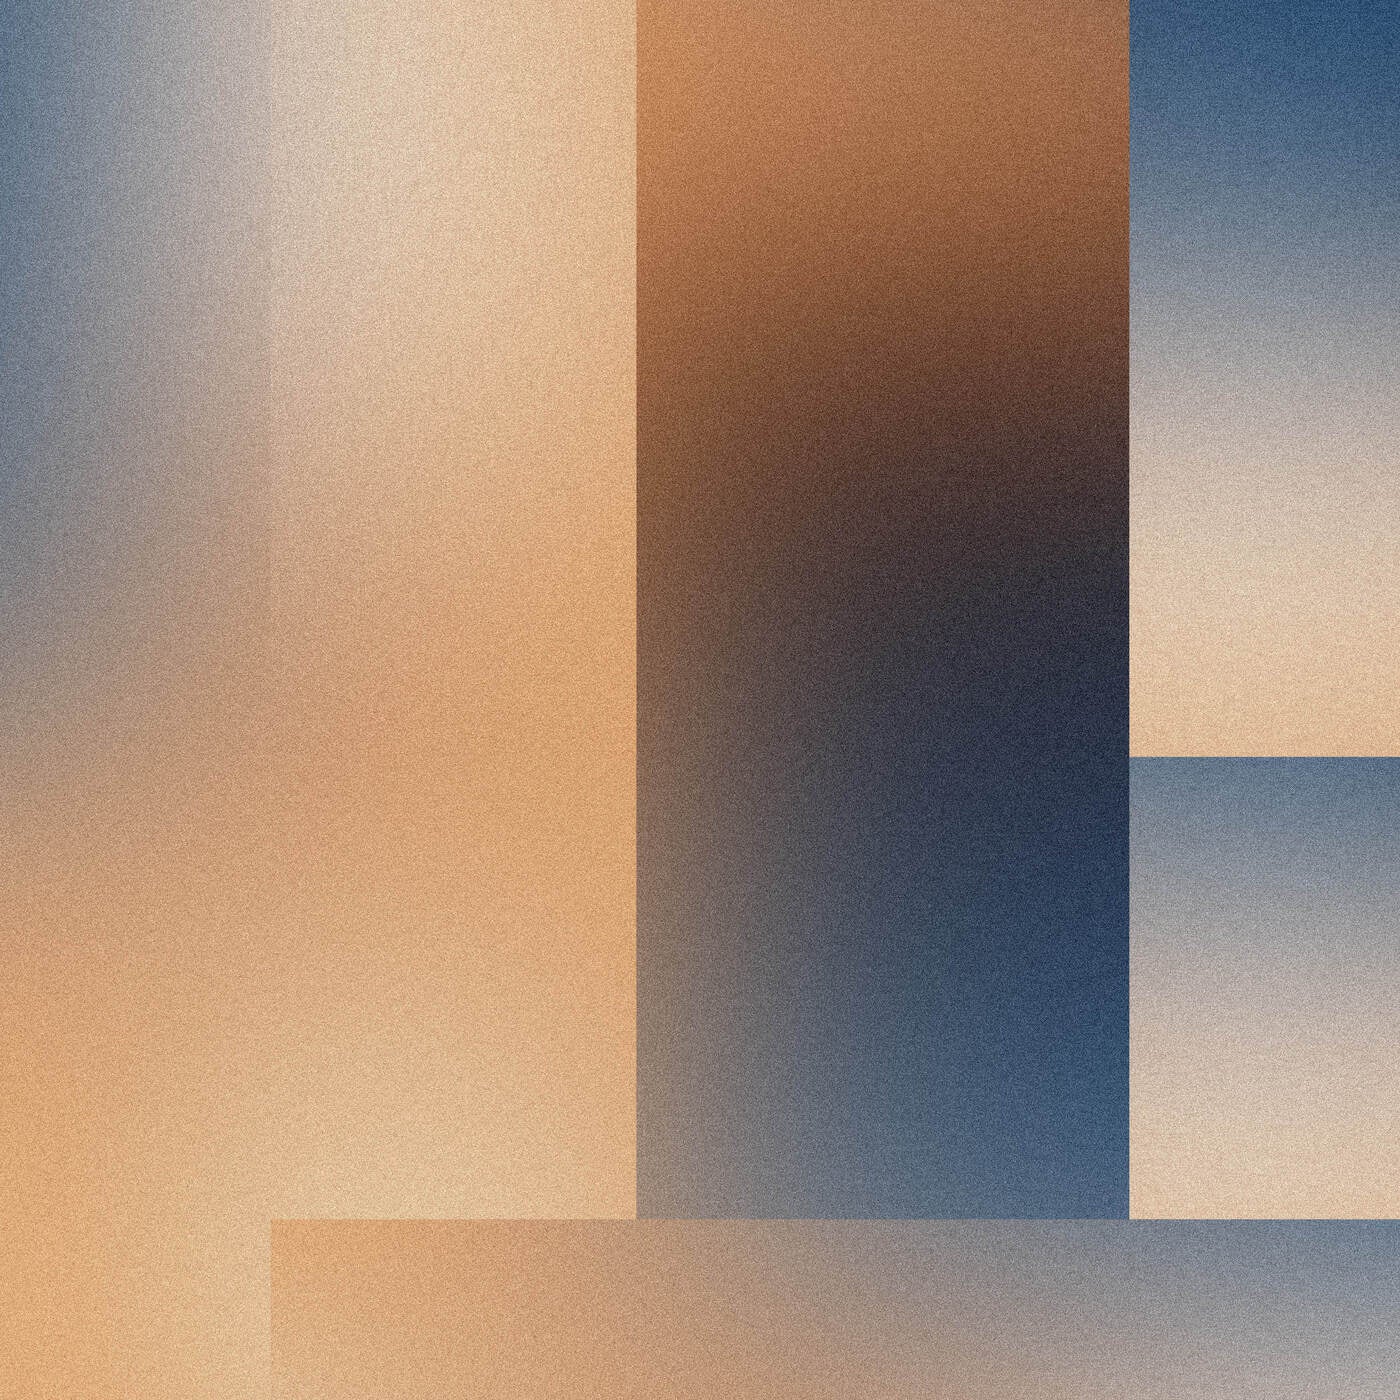 image cover: Fouk - Mirage on Heist Recordings